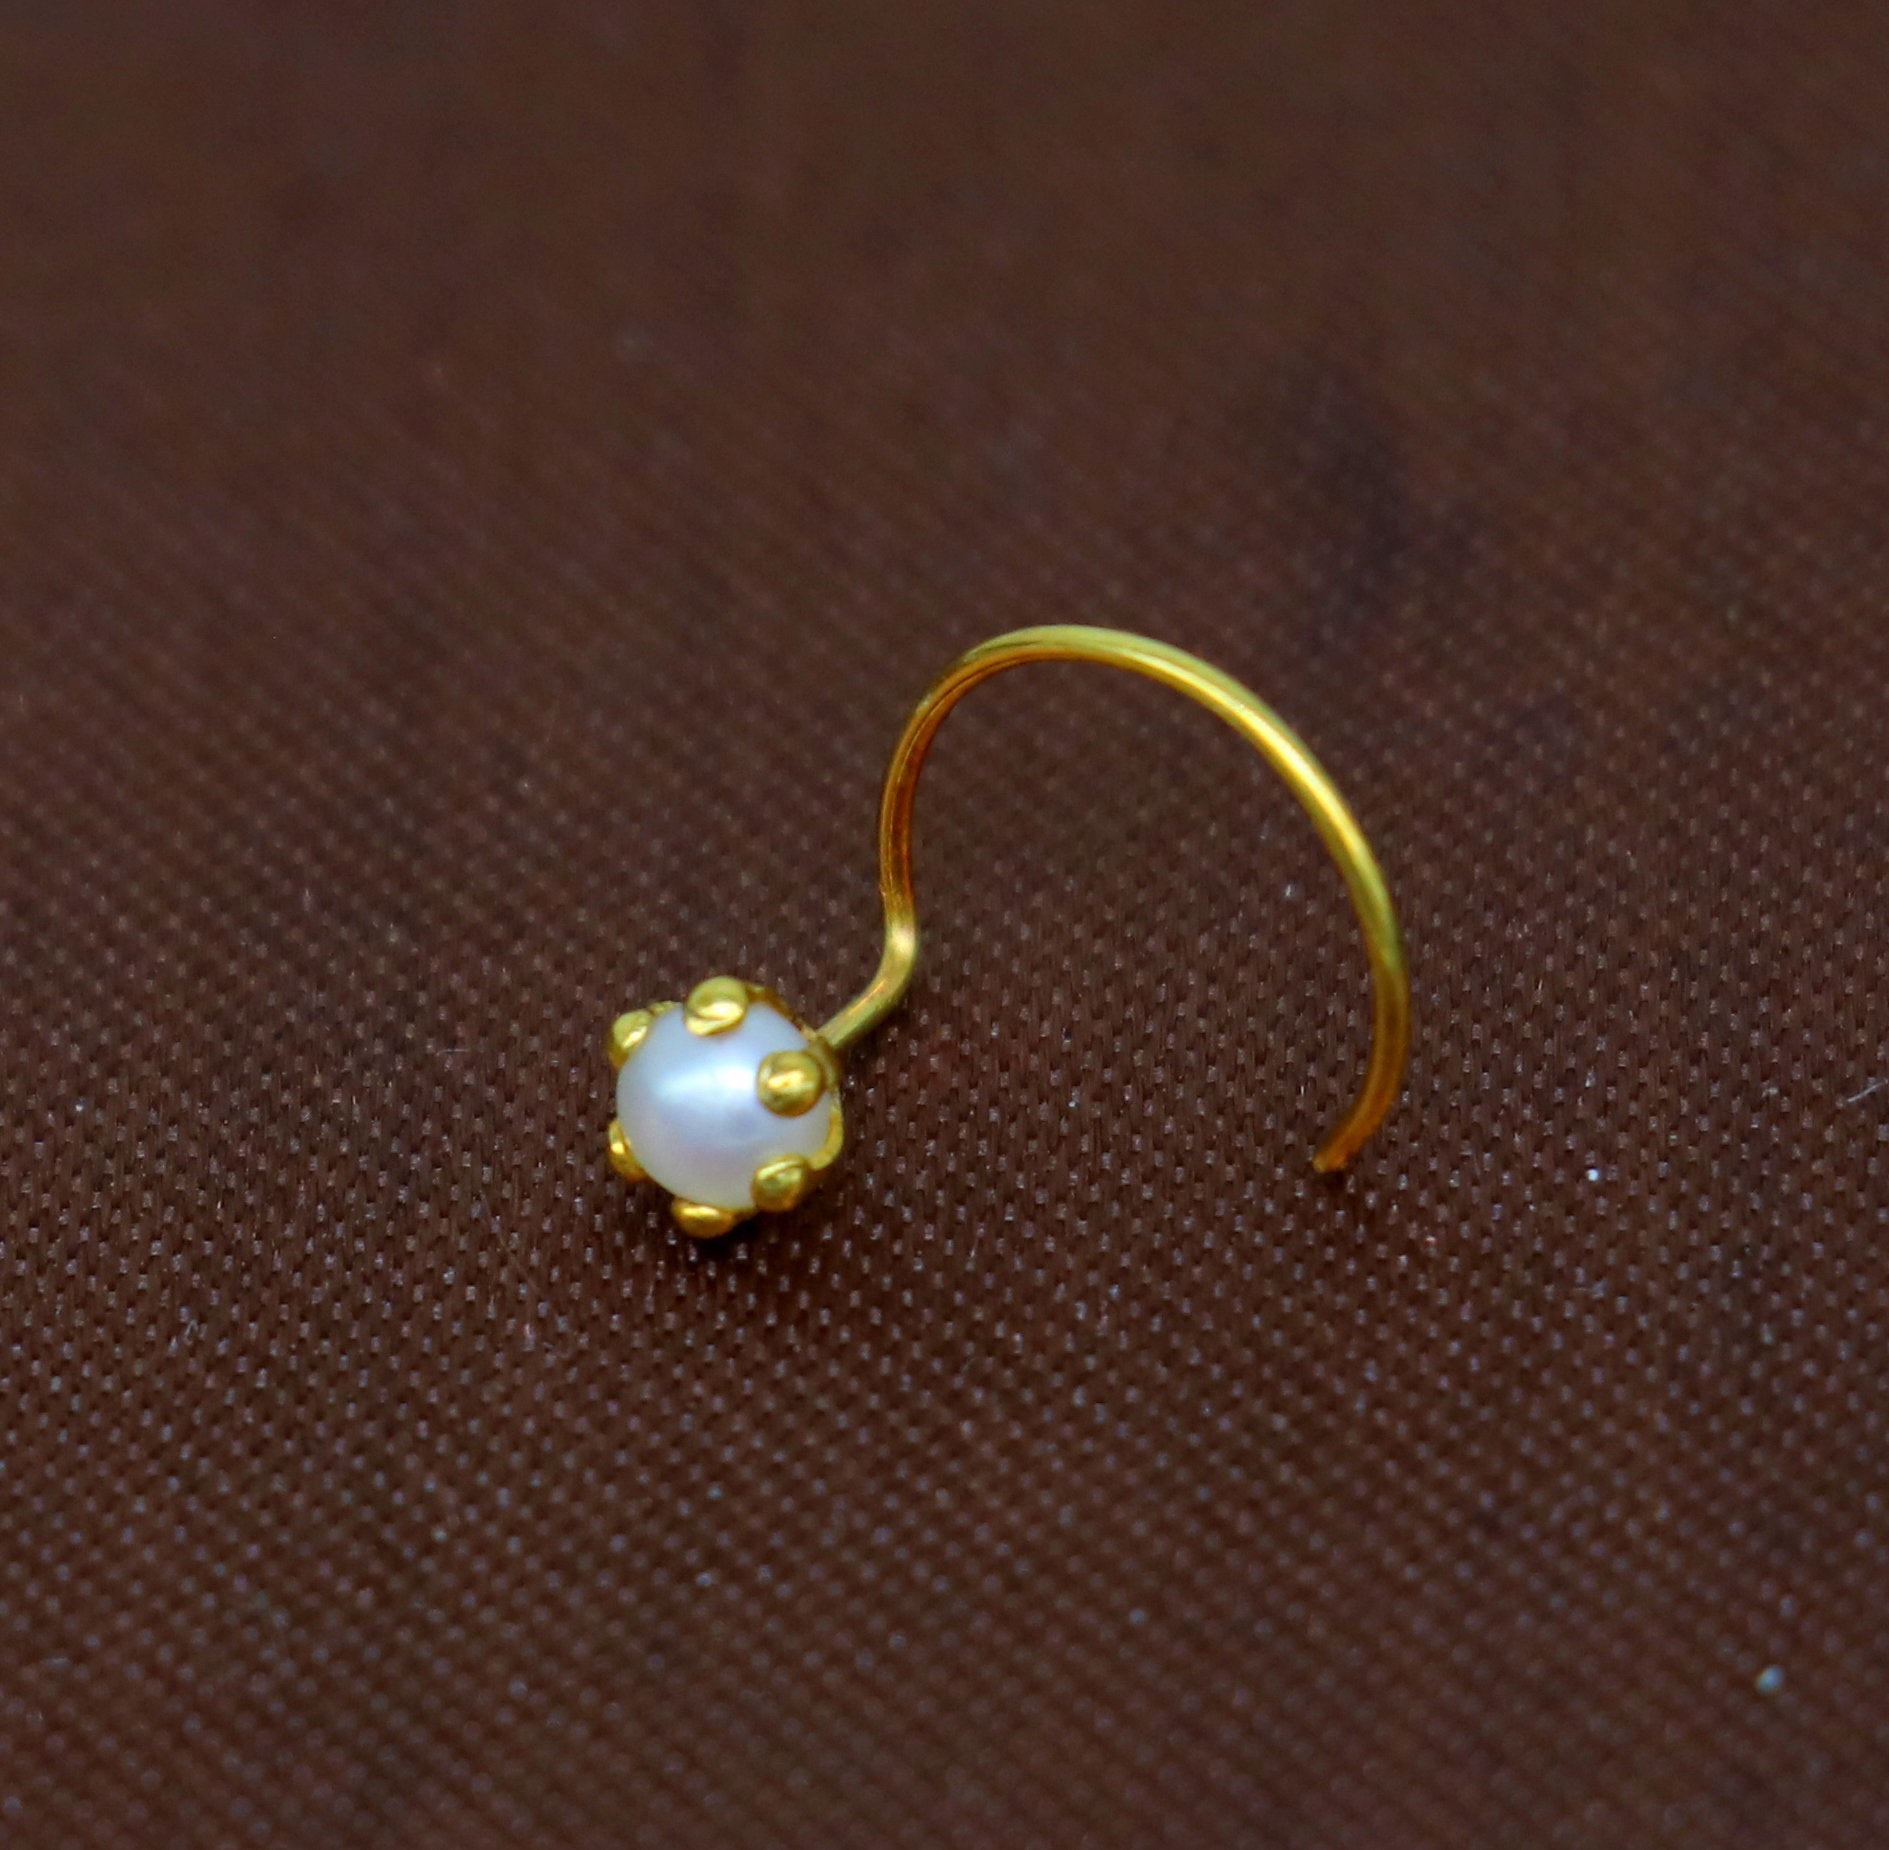 18 kt yellow fine gold fabulous nose pin, excellent single pearl nose pin, stunning design gifting gold jewelry for girl's women's gnp37 - TRIBAL ORNAMENTS